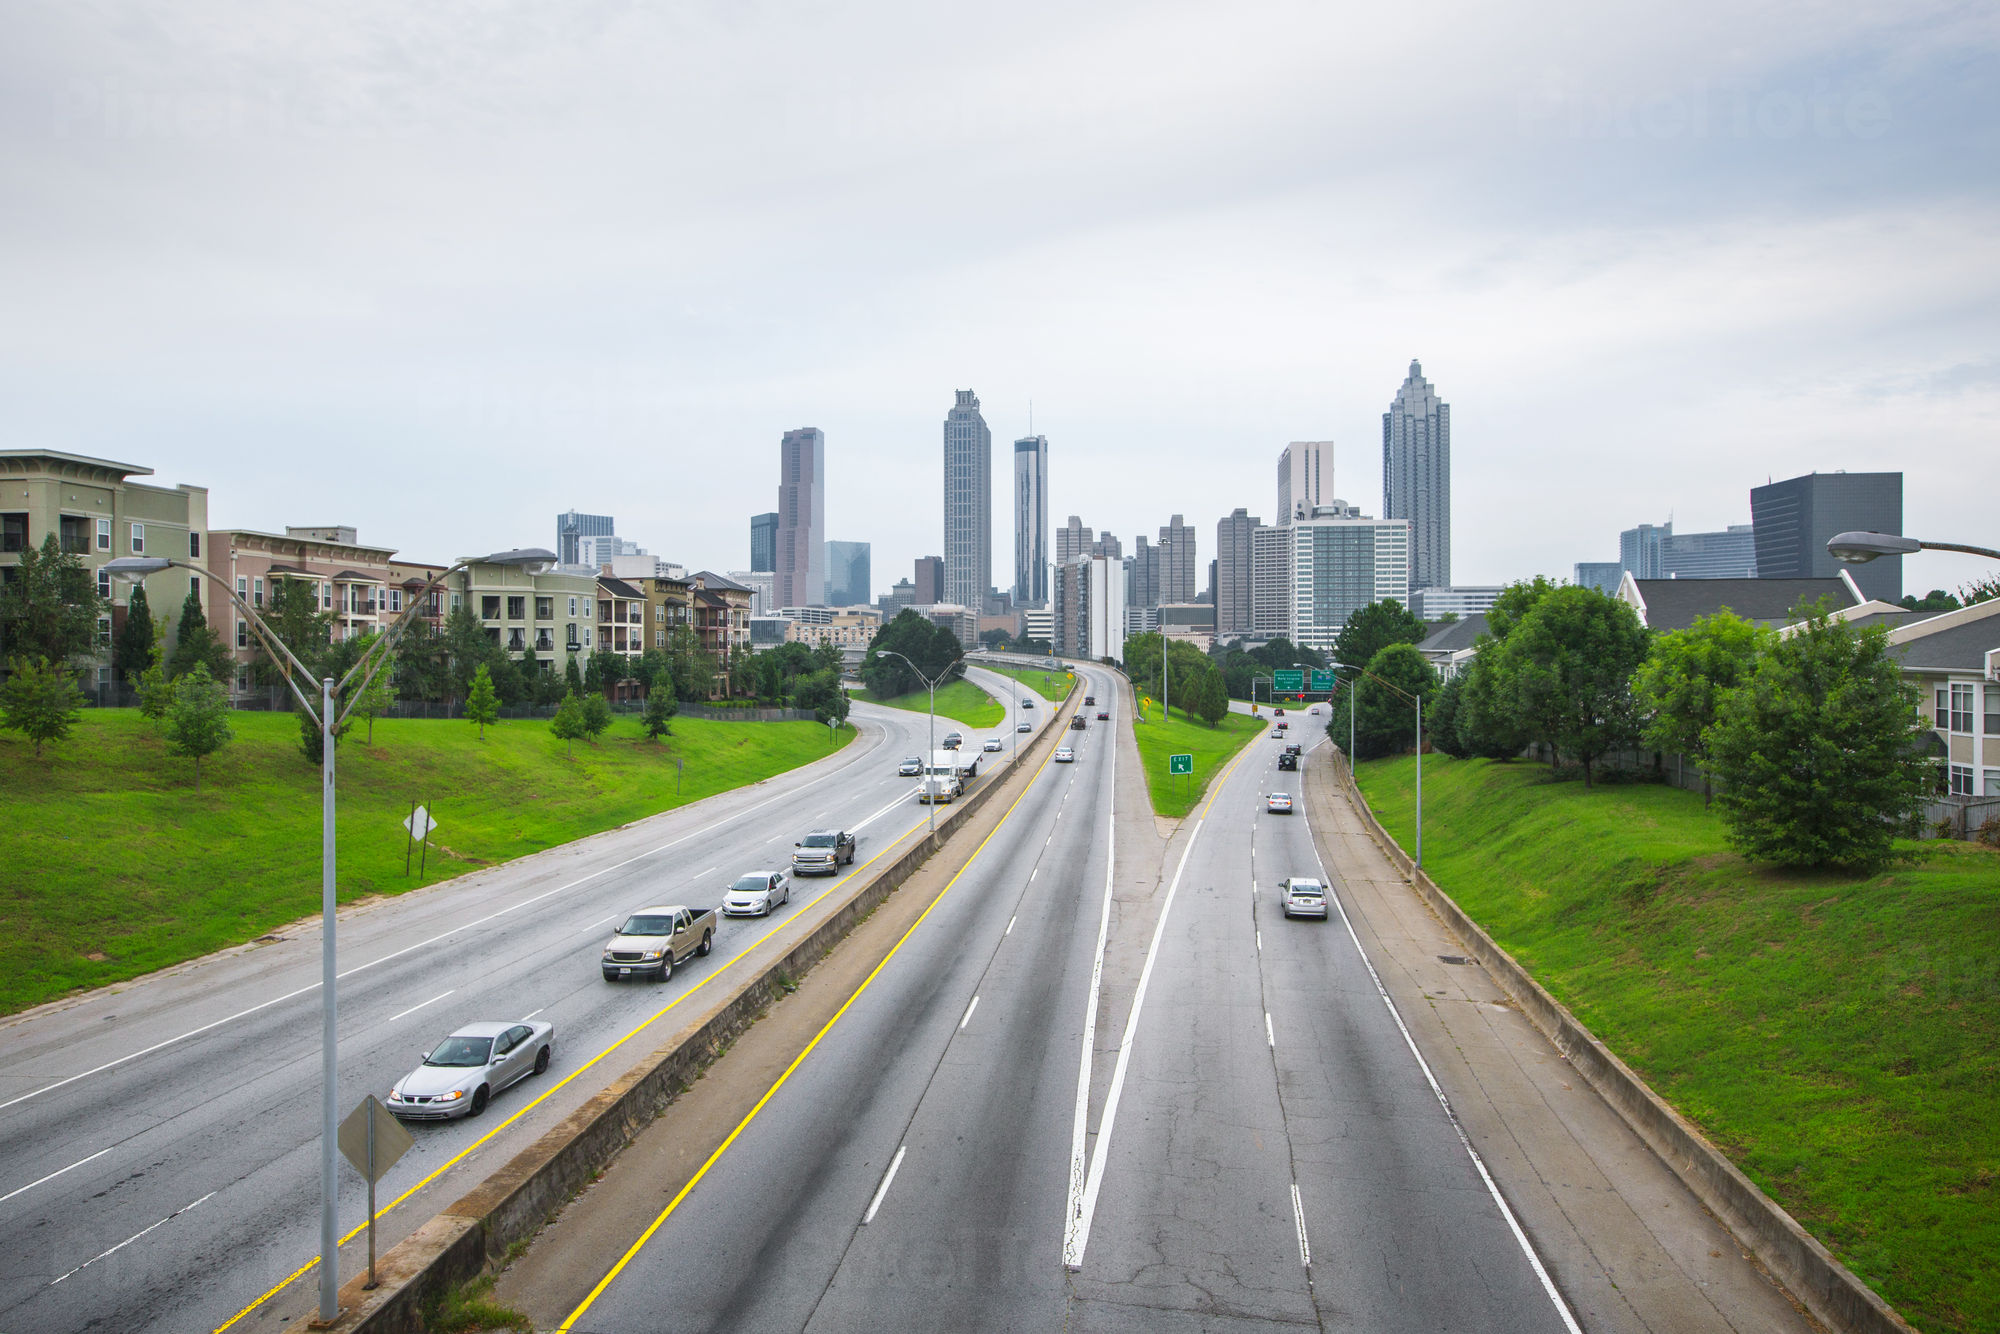 Pv Lg Wide Angle View Of Downtown Atlanta And Highway With Cars Default Stock Photo 